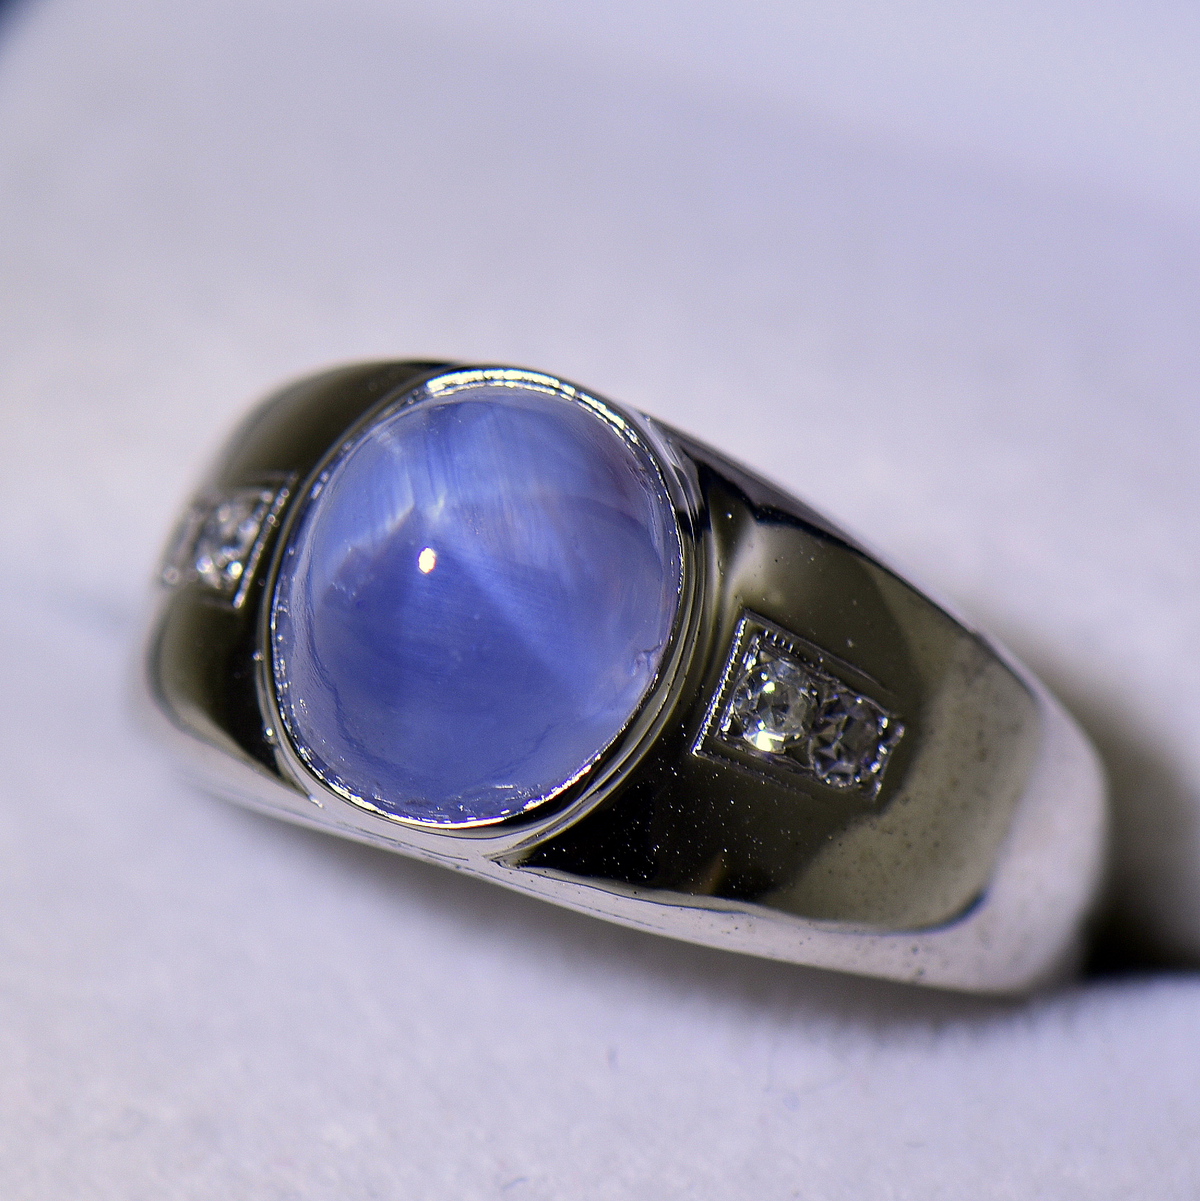 Star Sapphire Stone Silver Ring